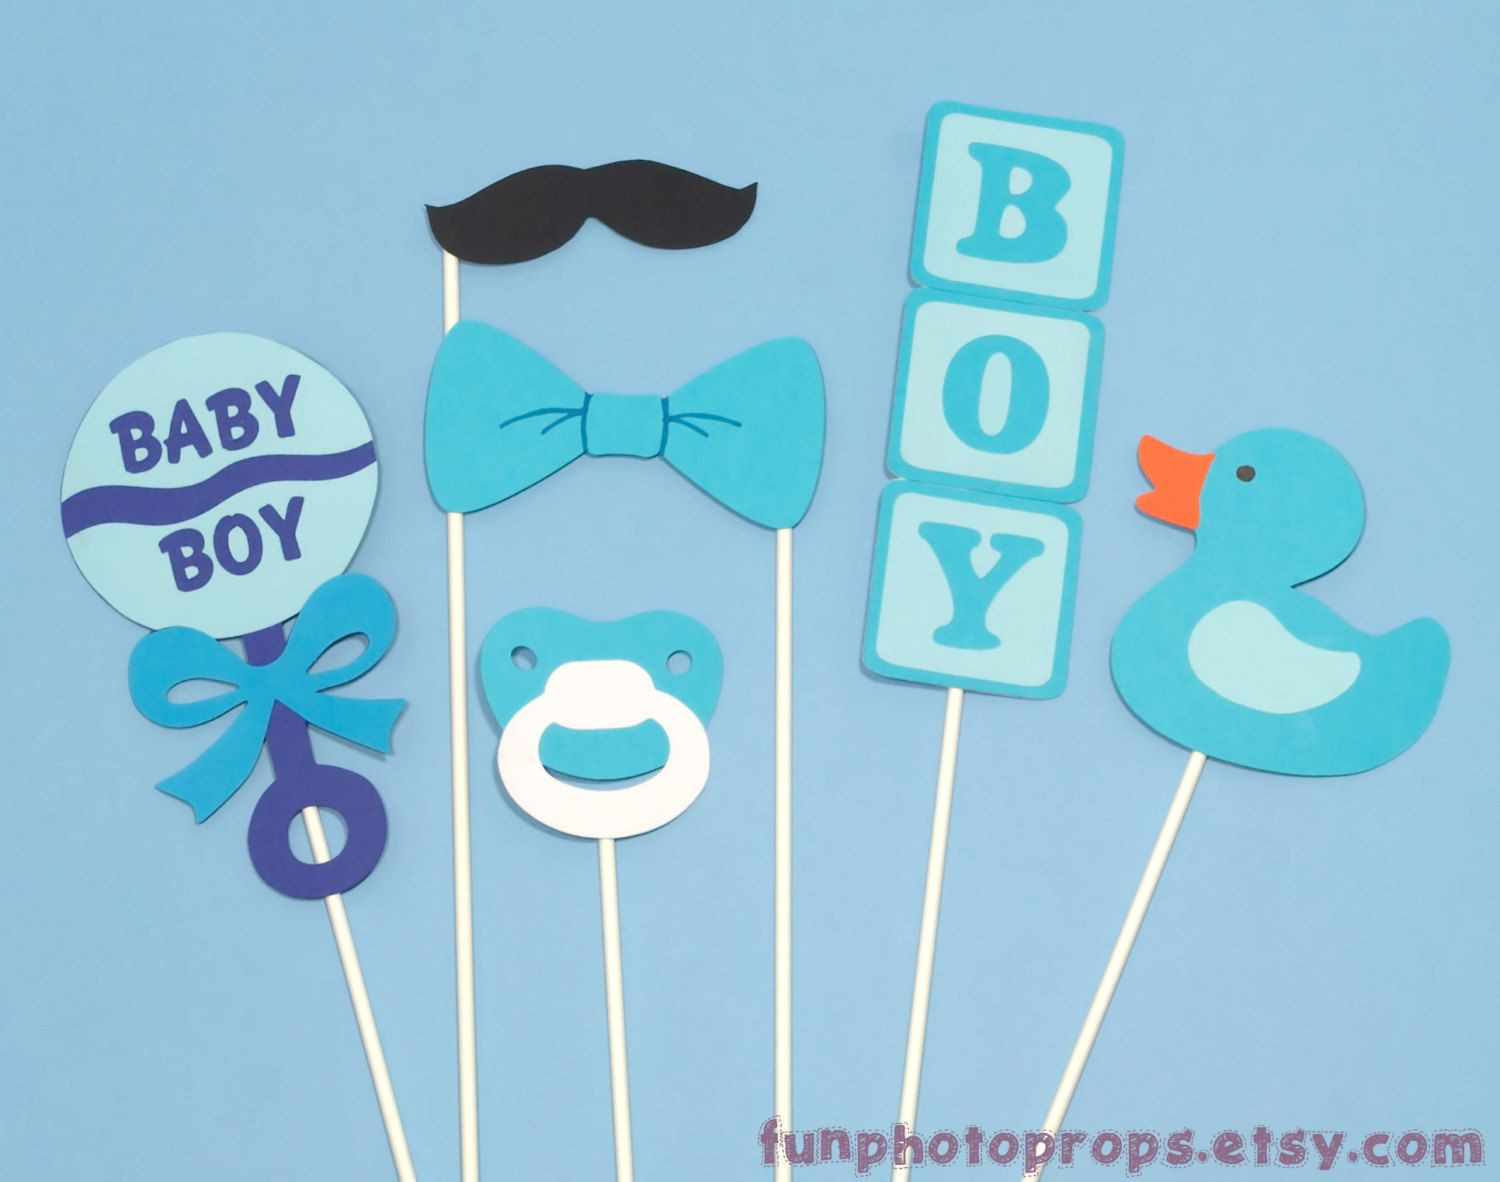 Baby Shower Photo Booth Props Party City
 Booth Prop Set 6 Piece Baby Boy booth